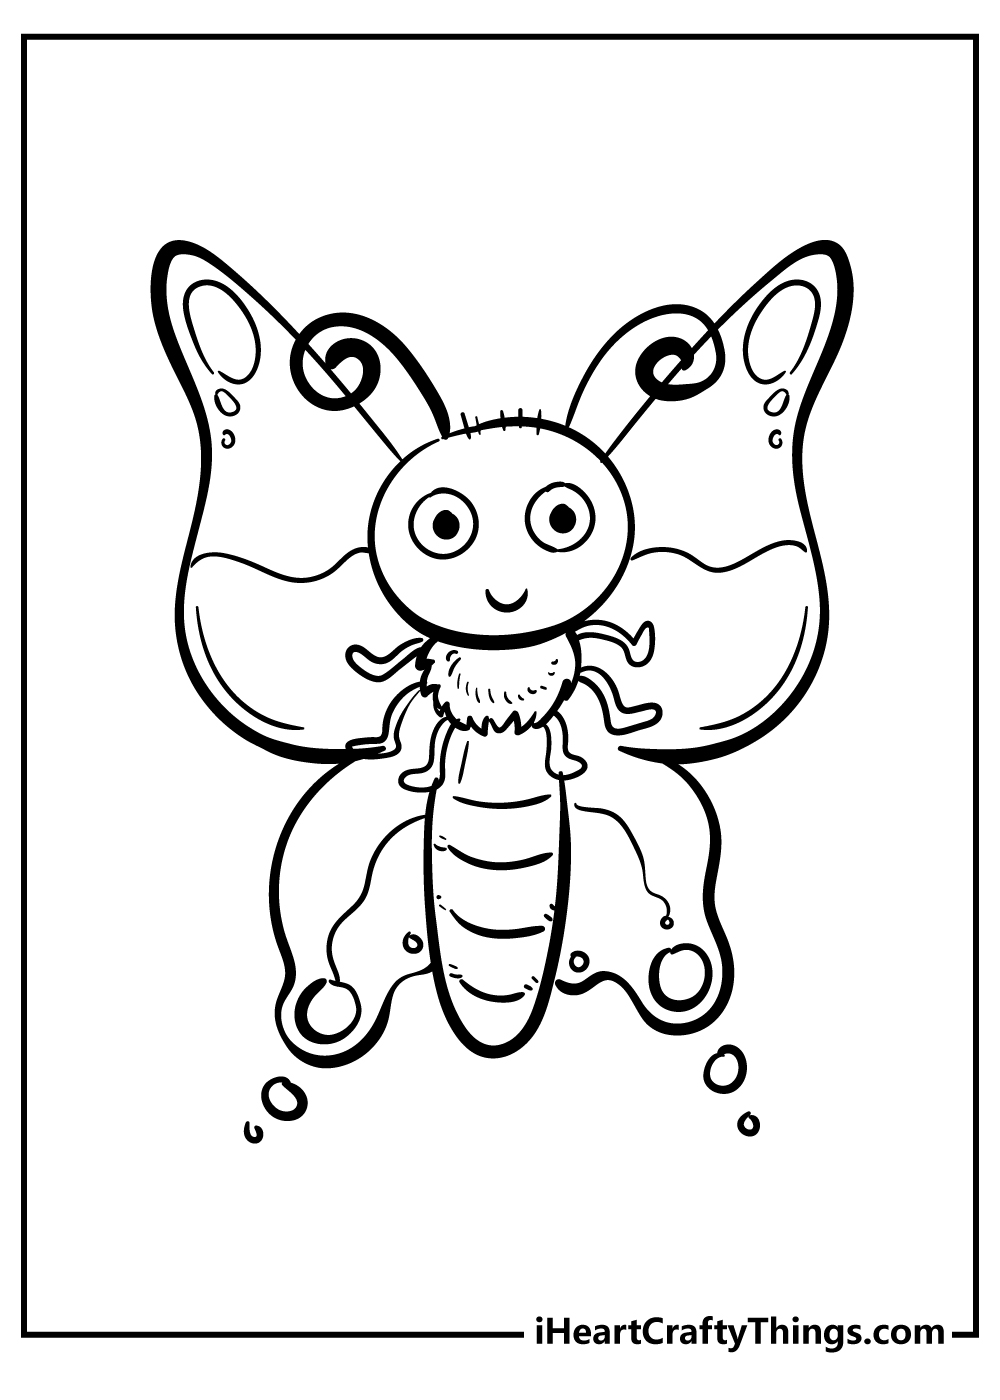 Insect Coloring Sheet for children free download